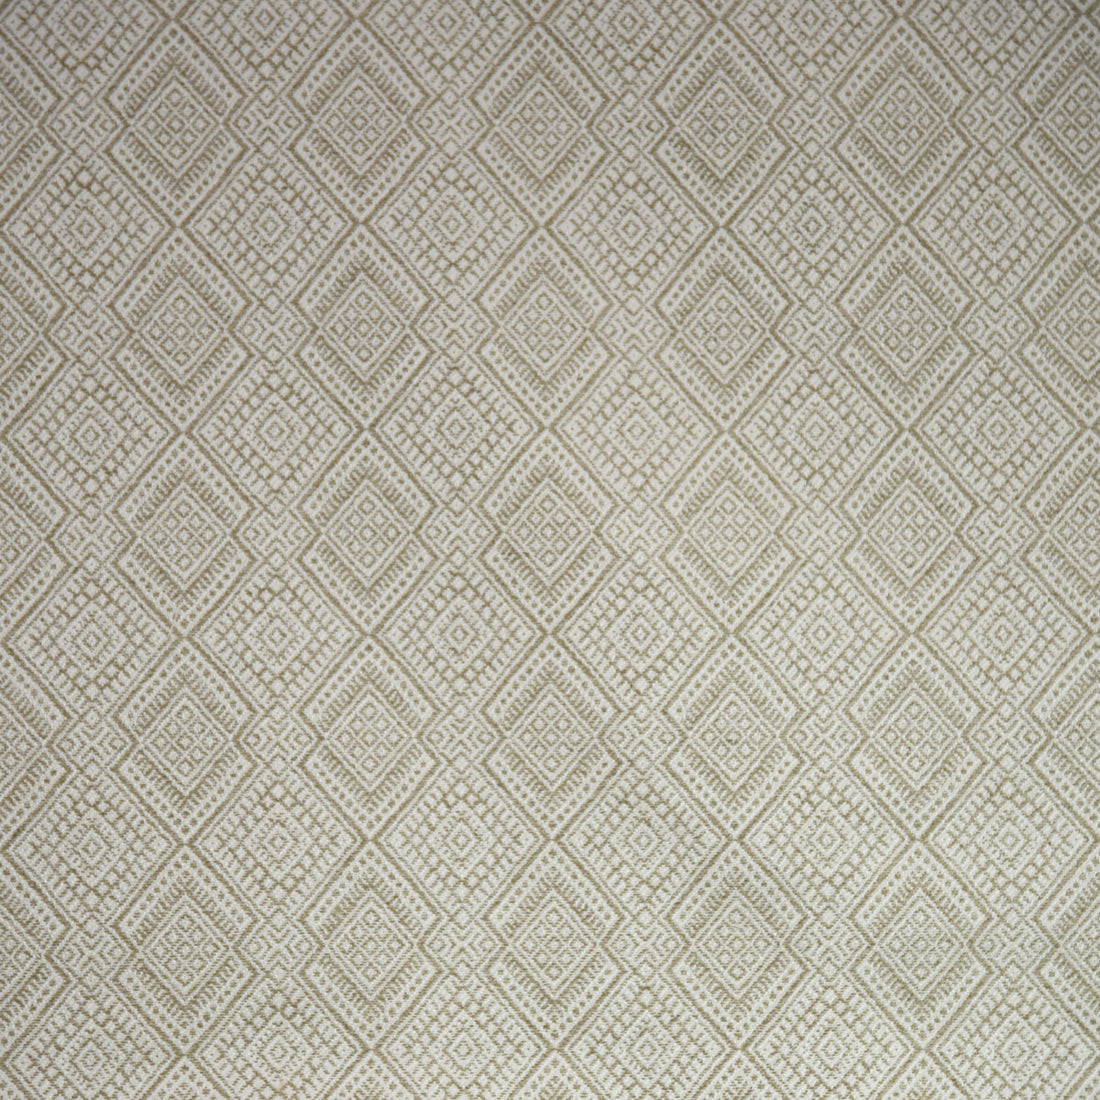 Iguazu fabric in camel color - pattern 35551.16.0 - by Kravet Couture in the Modern Colors-Sojourn Collection collection